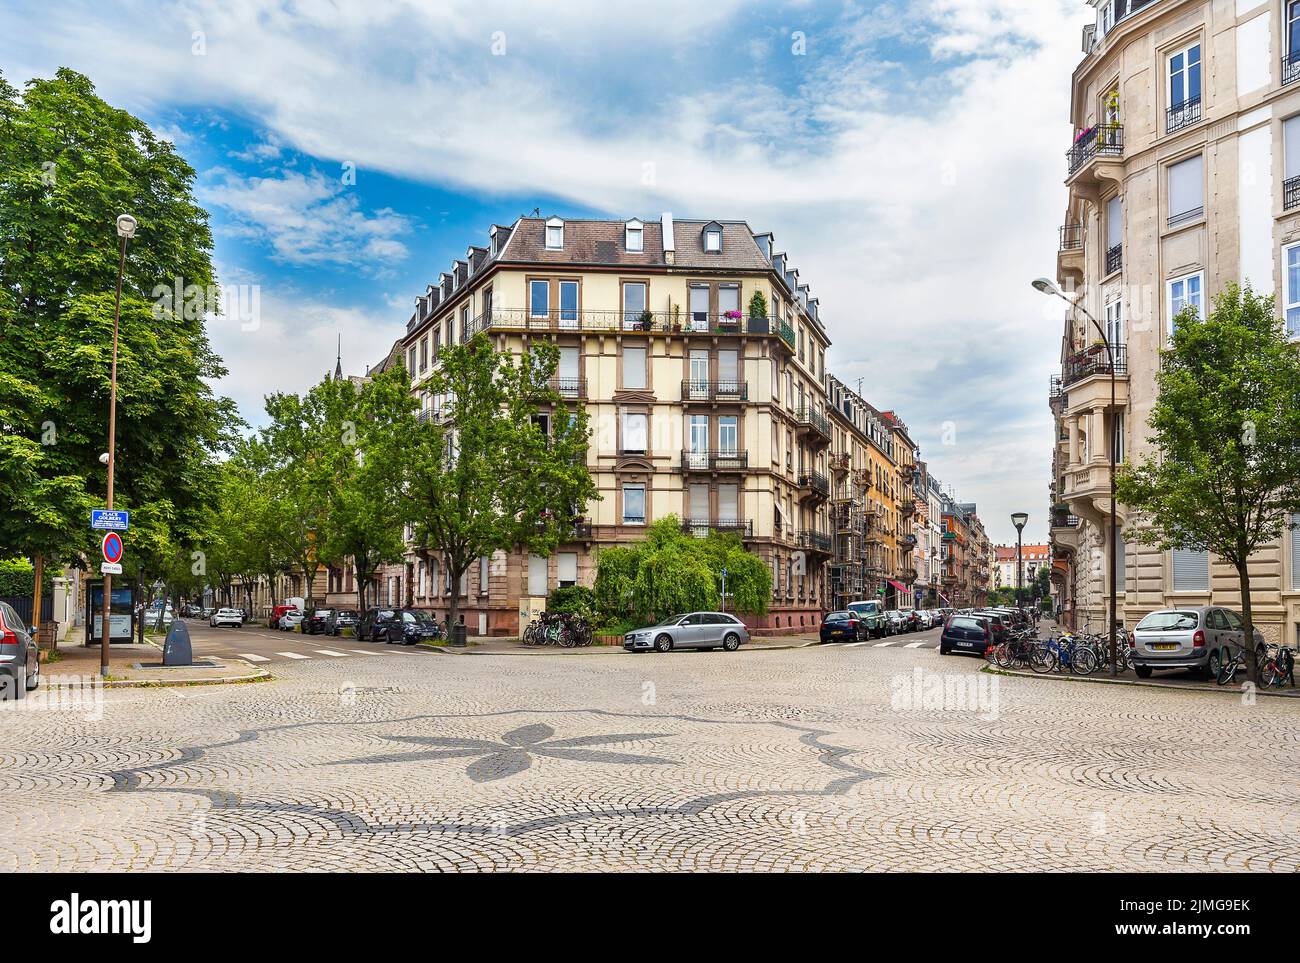 The center of Strasbourg with beautiful apartment buildings Stock Photo